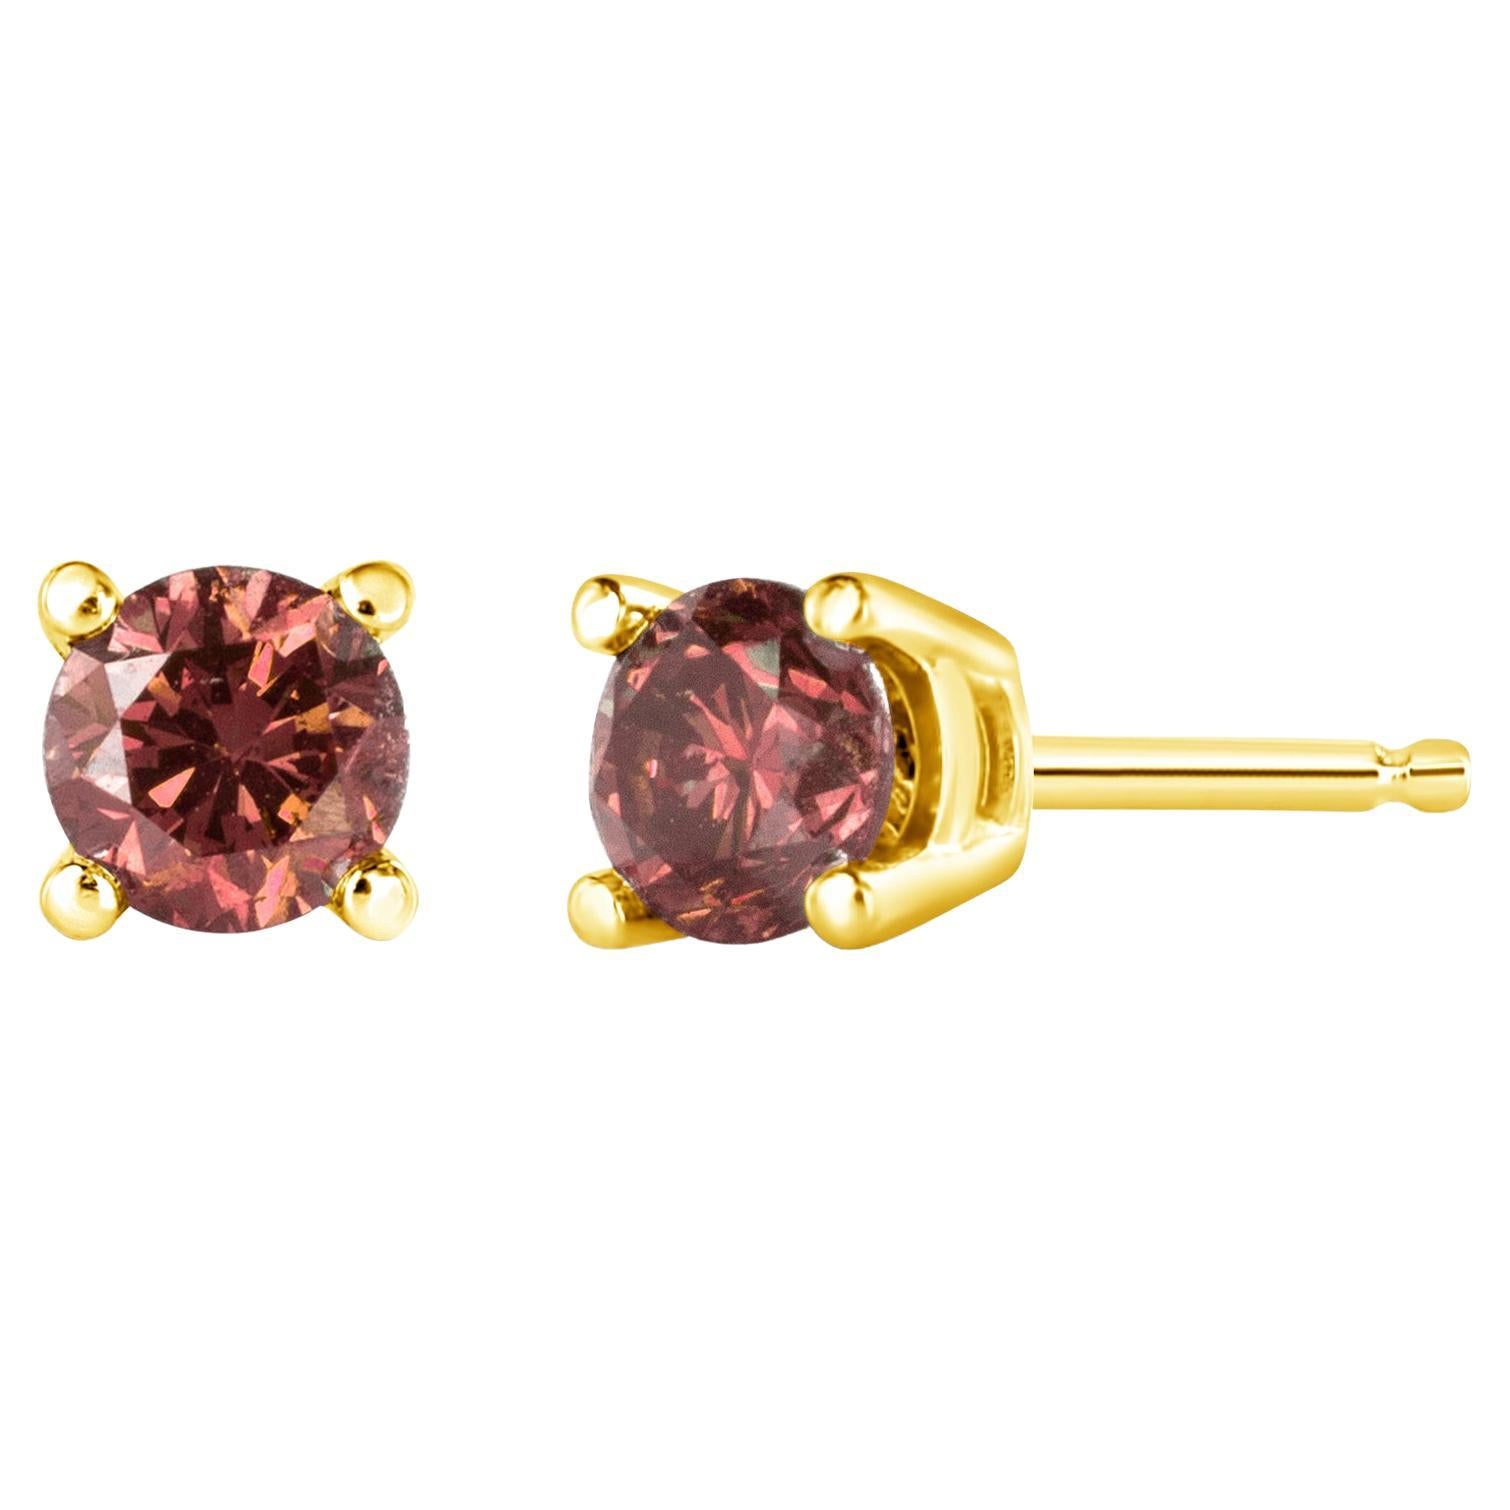 14K Yellow Gold 3/4 Carat Round-Cut Pink Diamond Solitaire Stud Earrings For Sale